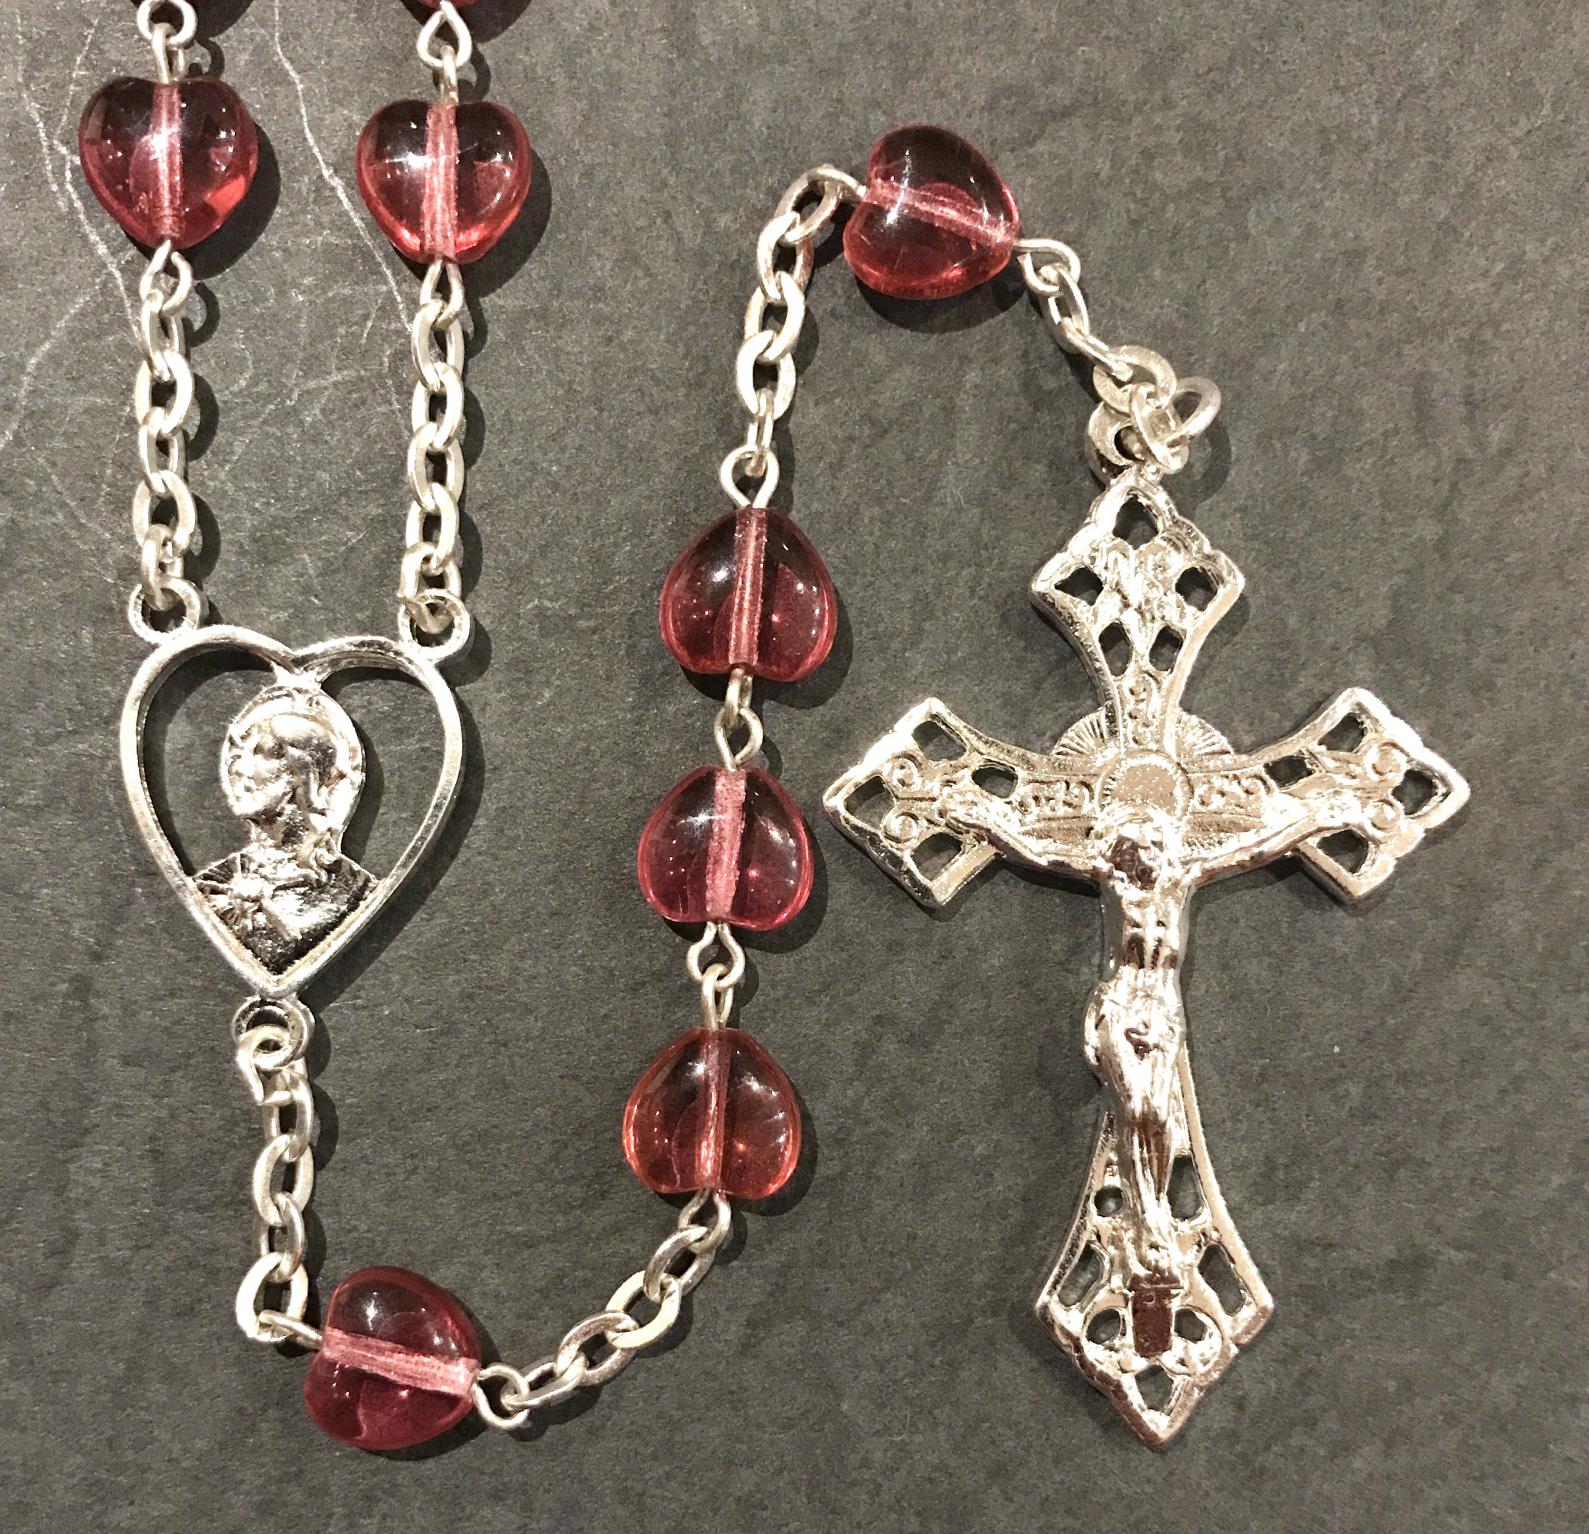 8X8mm PINK HEART SHAPED ROSARY WITH STERLING SILVER PLATED CRUCIFIX, CENTER, WIRE, CHAIN GIFT BOXED